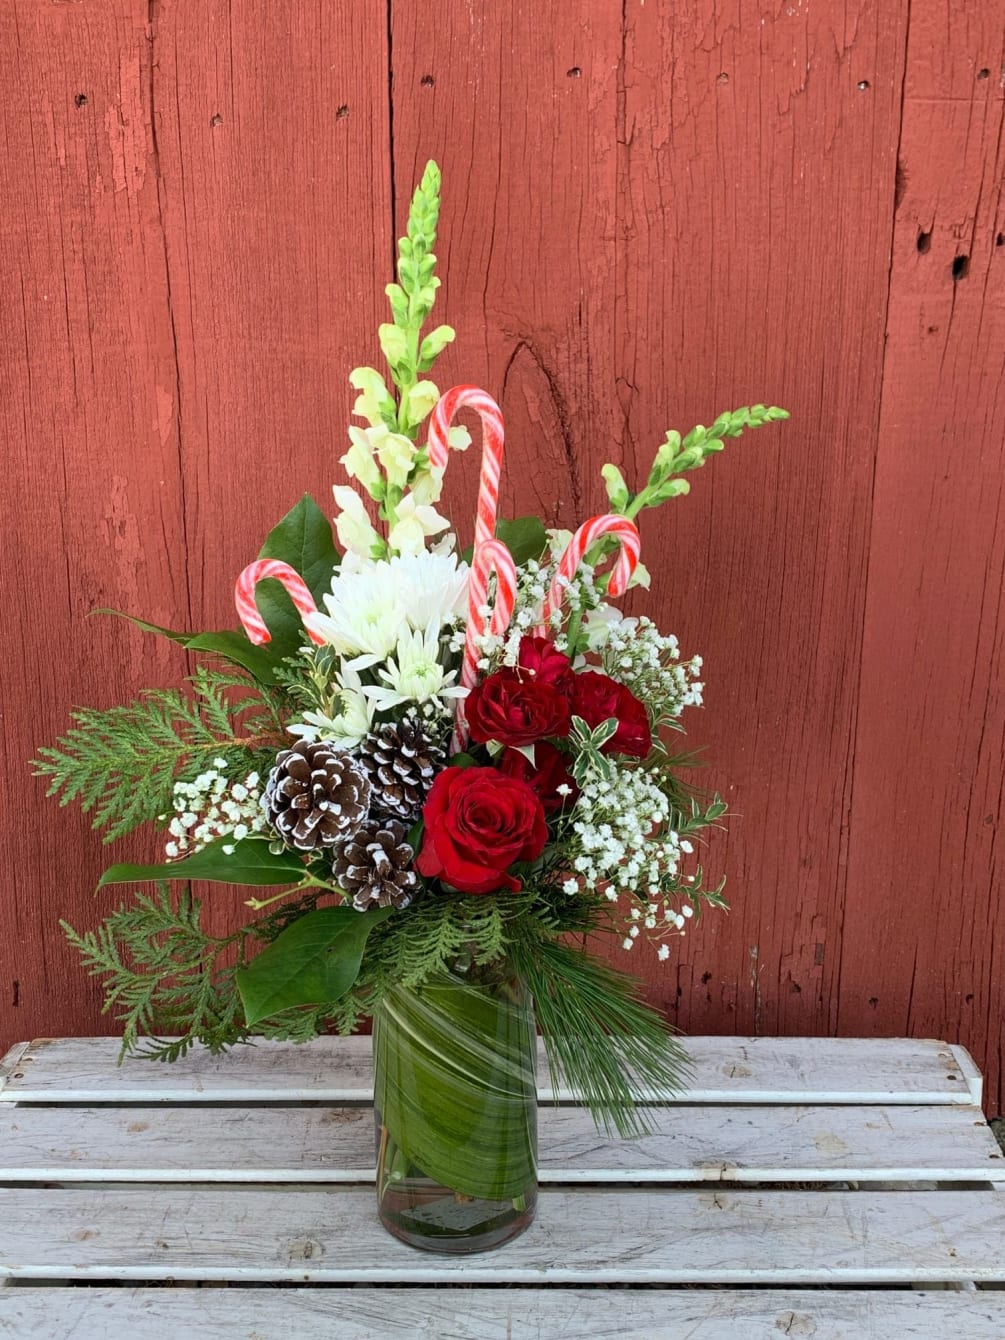 A festive arrangement including roses, pine cones, snapdragons, winter greens and other